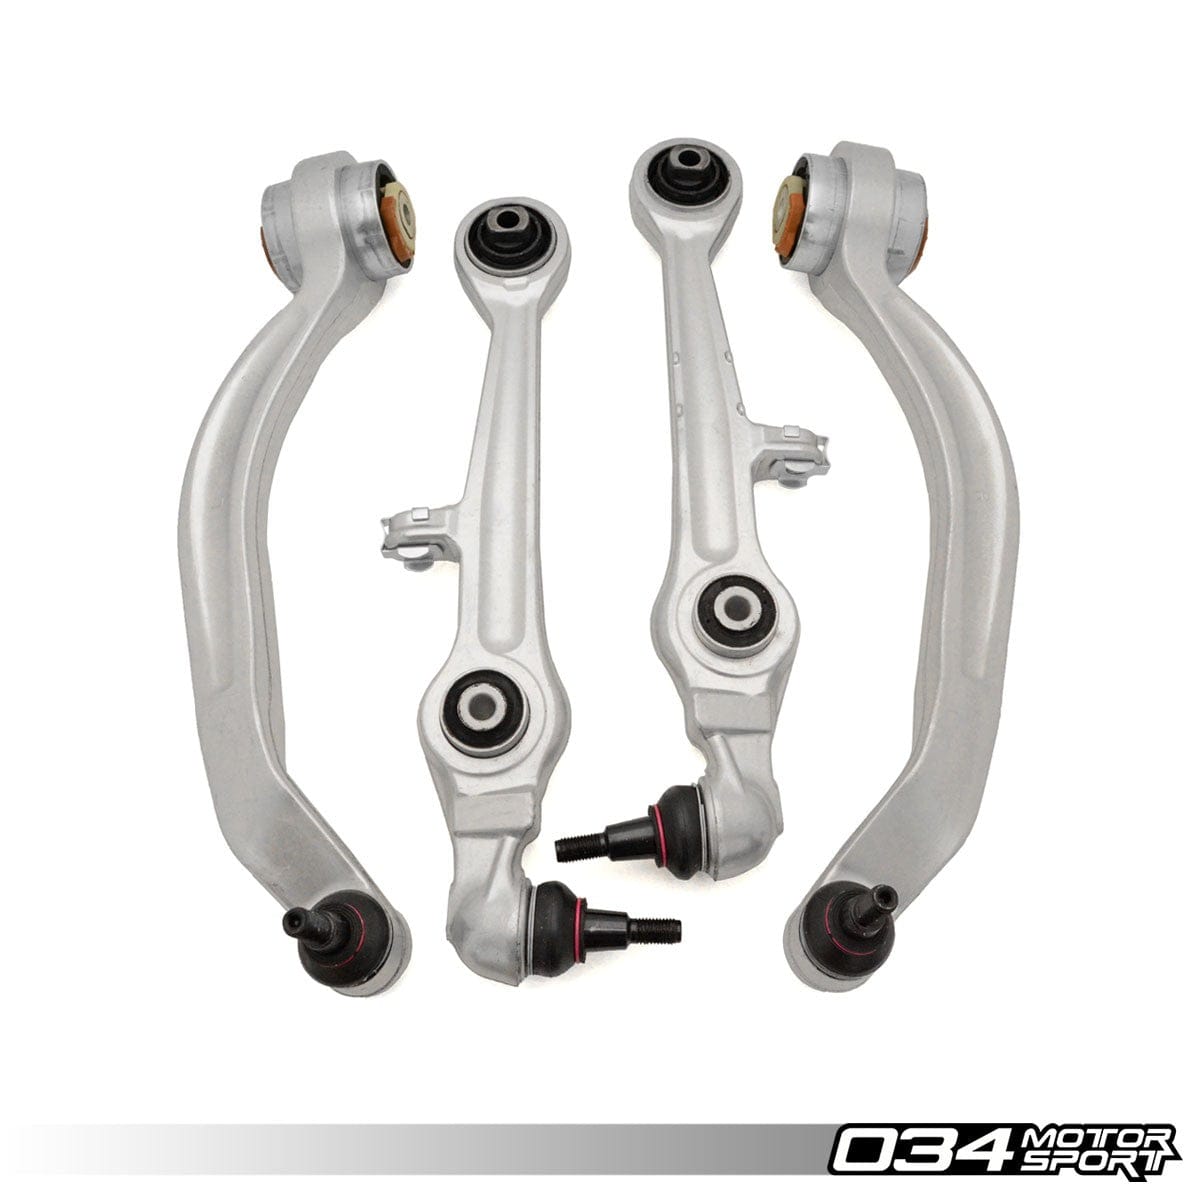 034Motorsport Audi VW Density Line Lower Control Arm Kit, Early B5/C5 S4/RS4 & A6/S6/RS6, B5 PASSAT With Aluminum Uprights - ML Performance UK